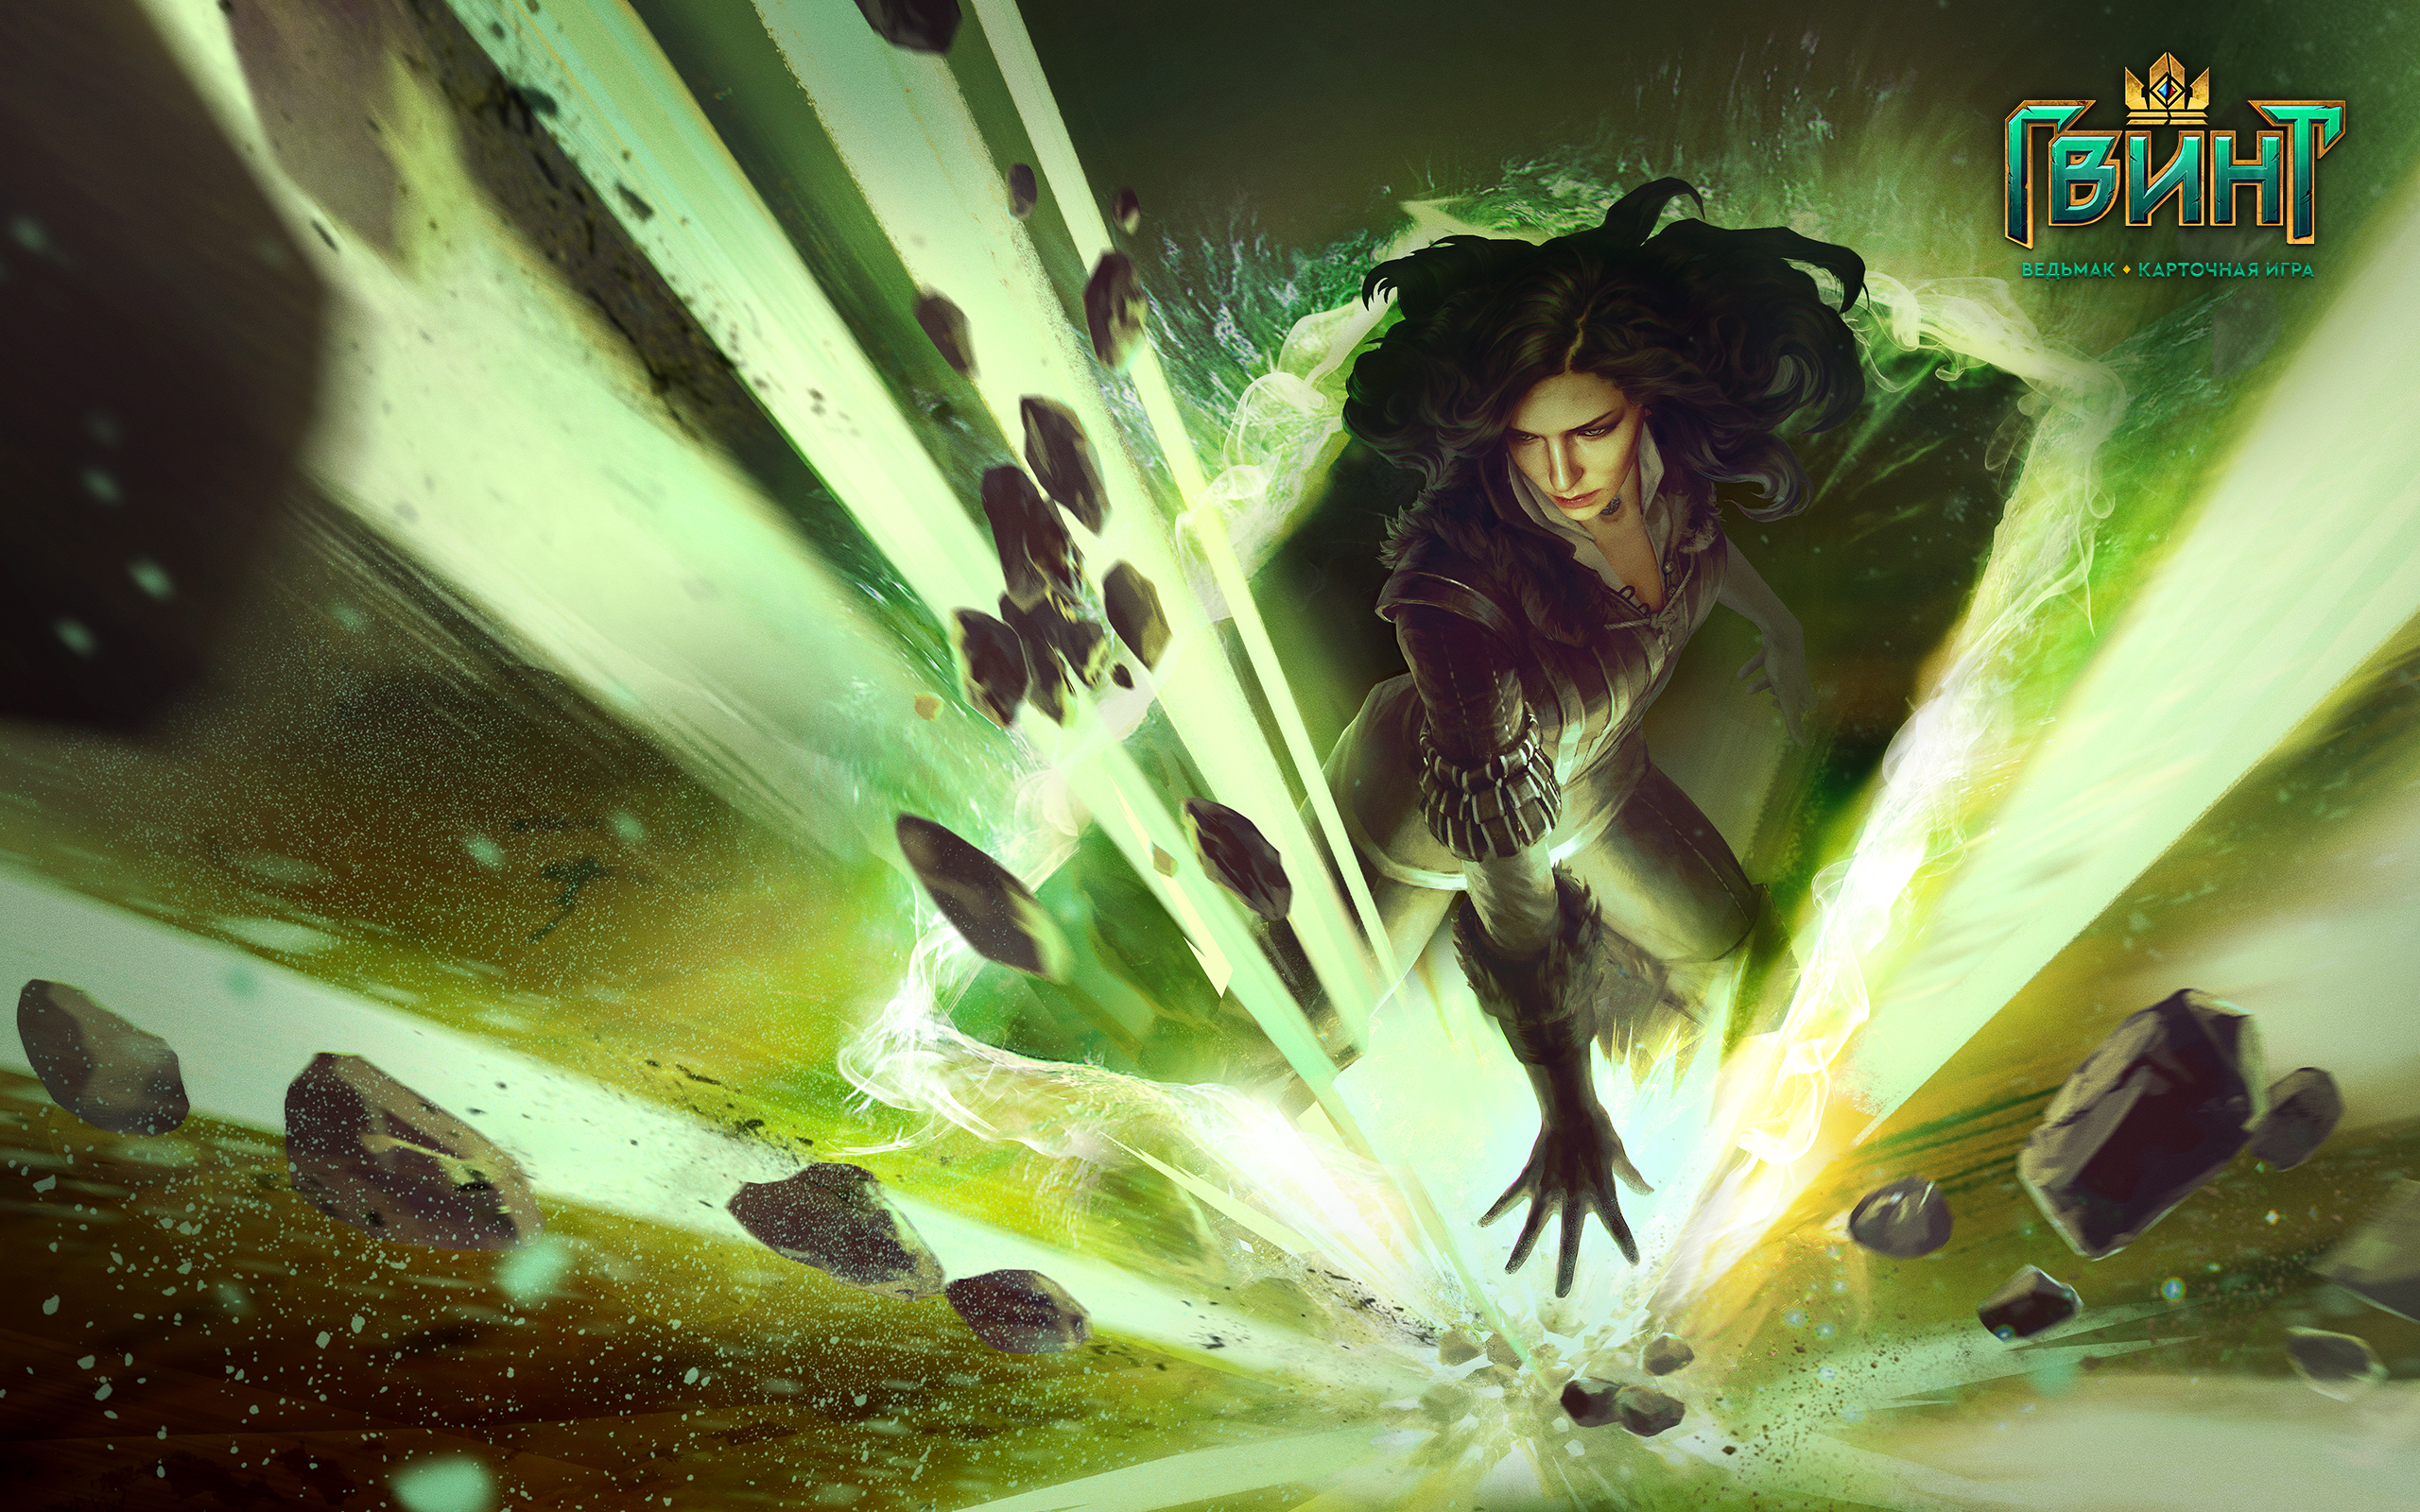 The Witcher Gwent Fantasy Yennefer Of Vengerberg Mage Gwent The Witcher Card Game 2560x1600